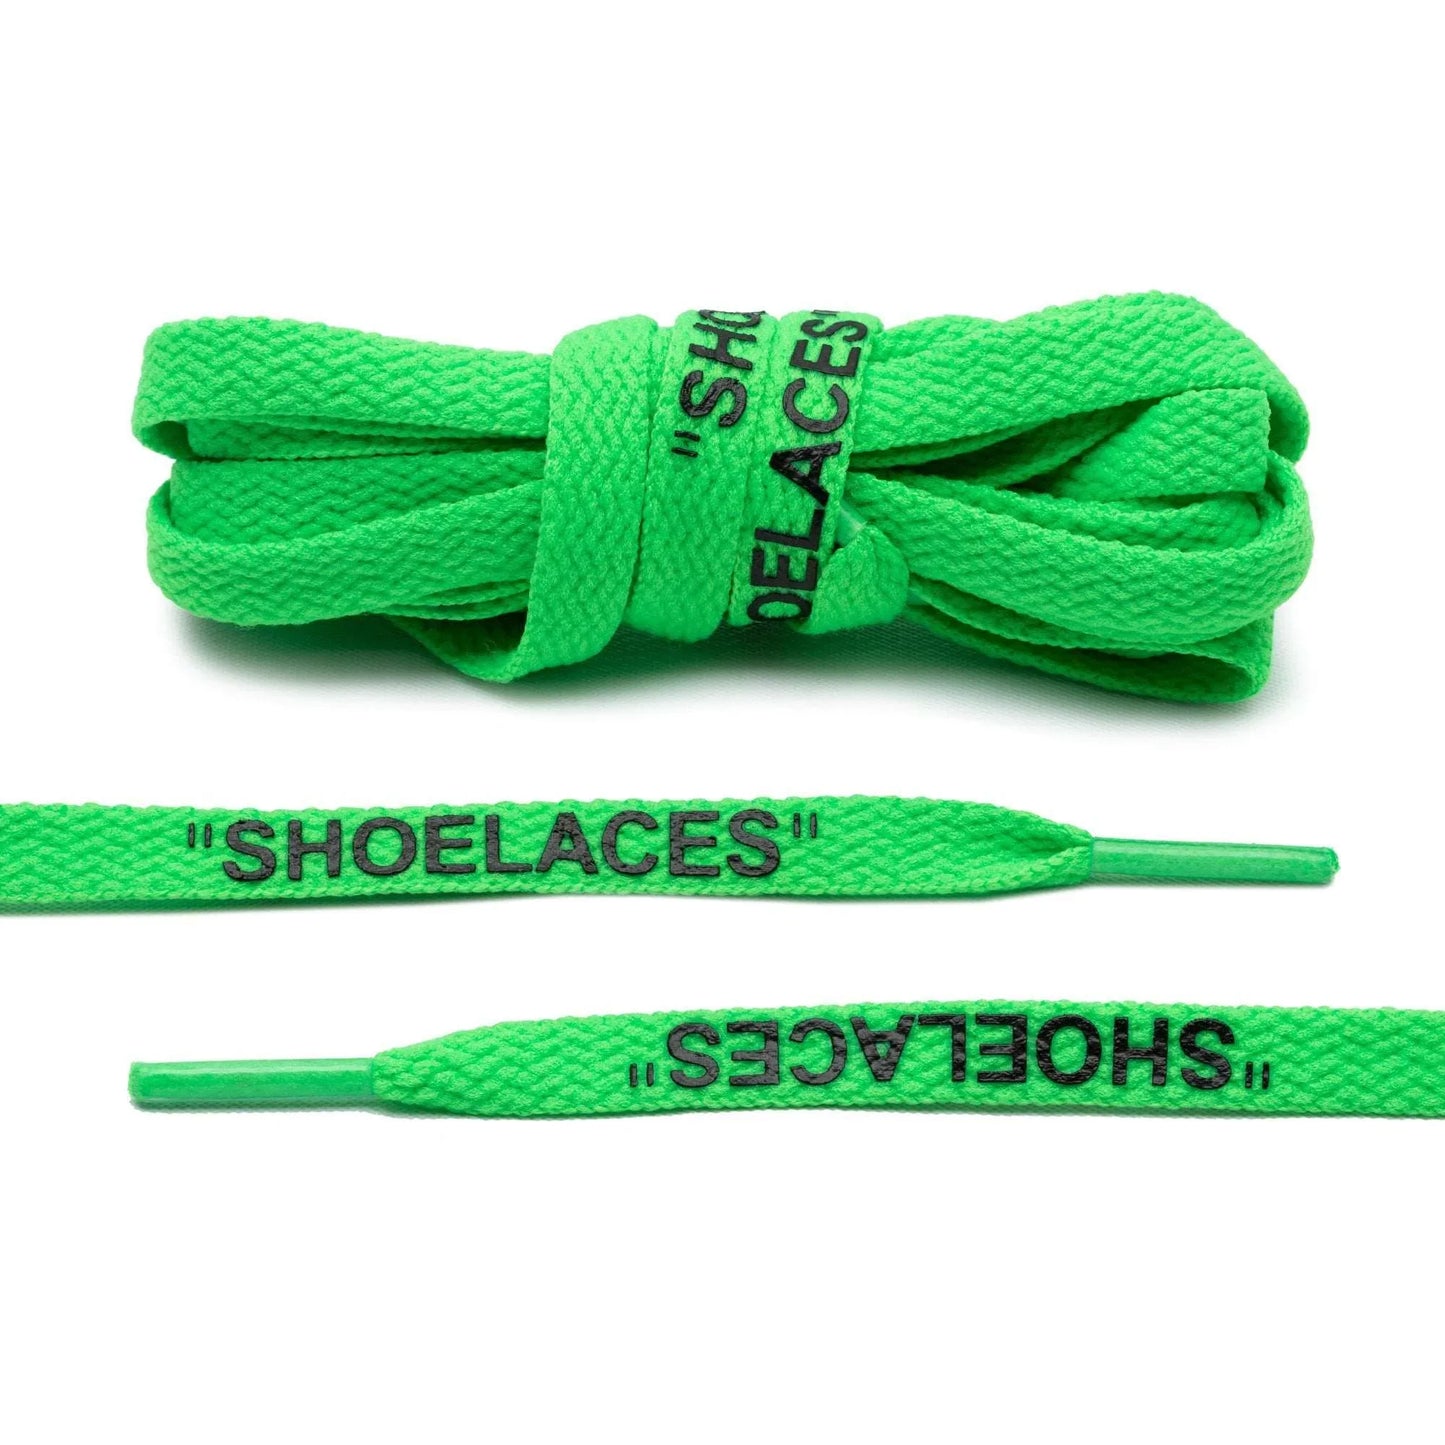 OFF WHITE "shoelaces" green